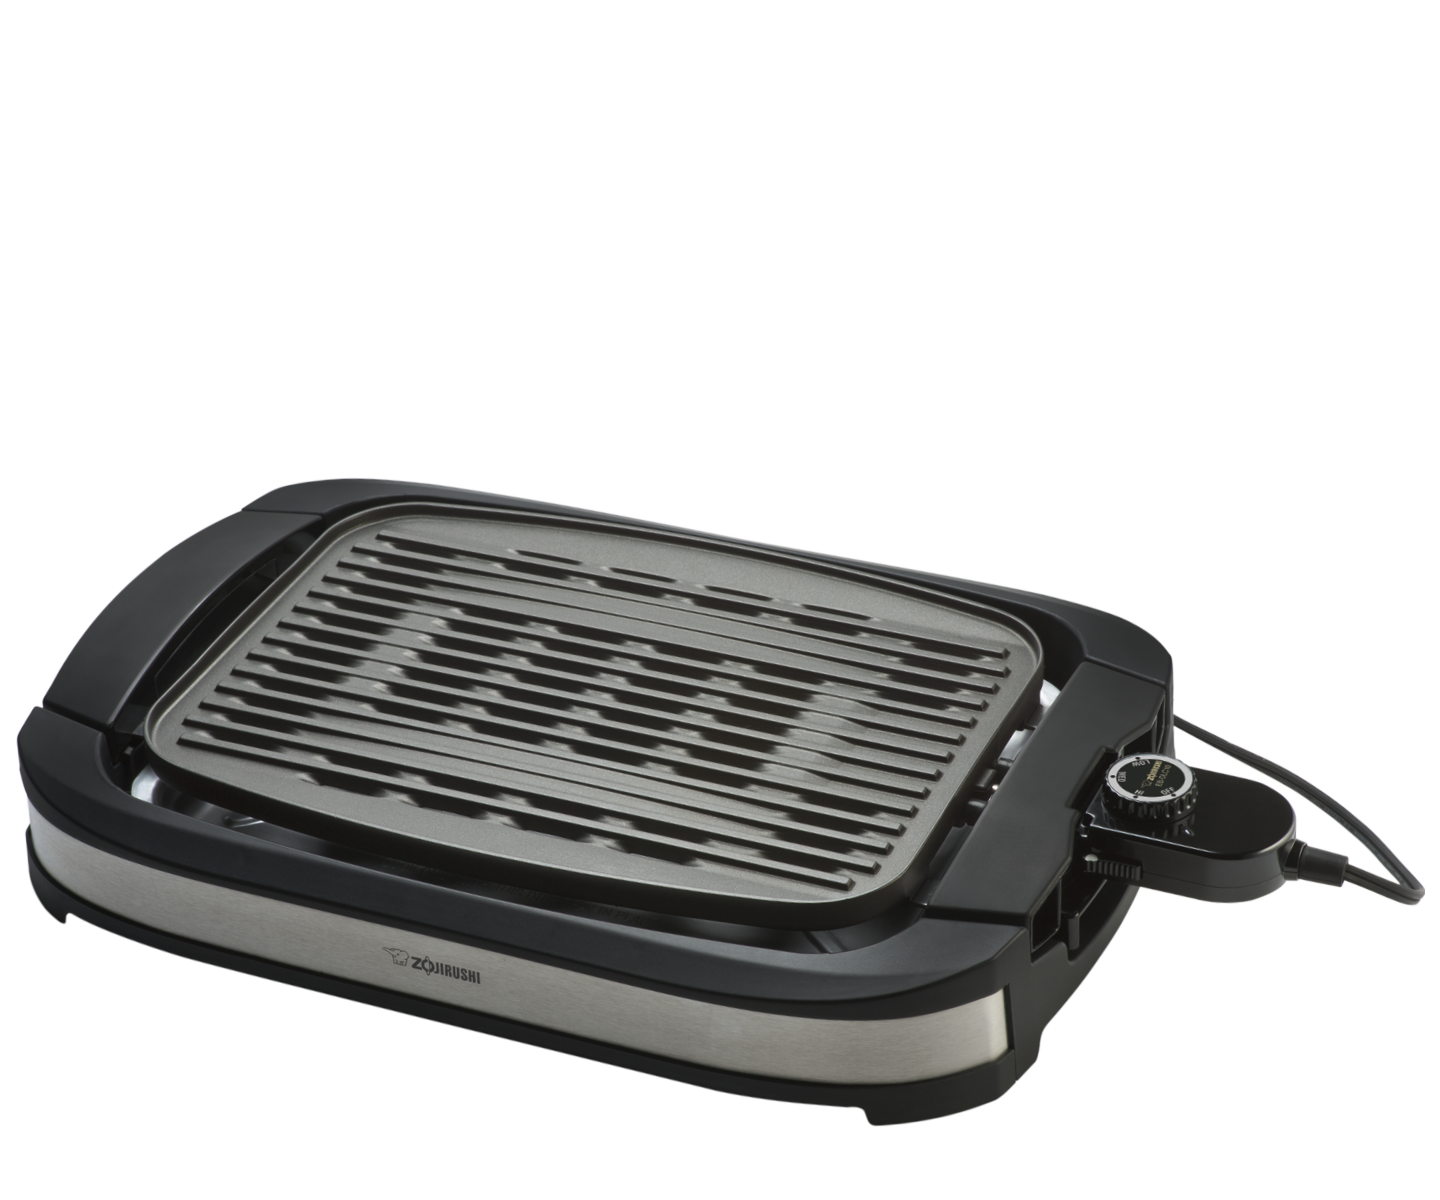 This indoor stovetop grill is $18